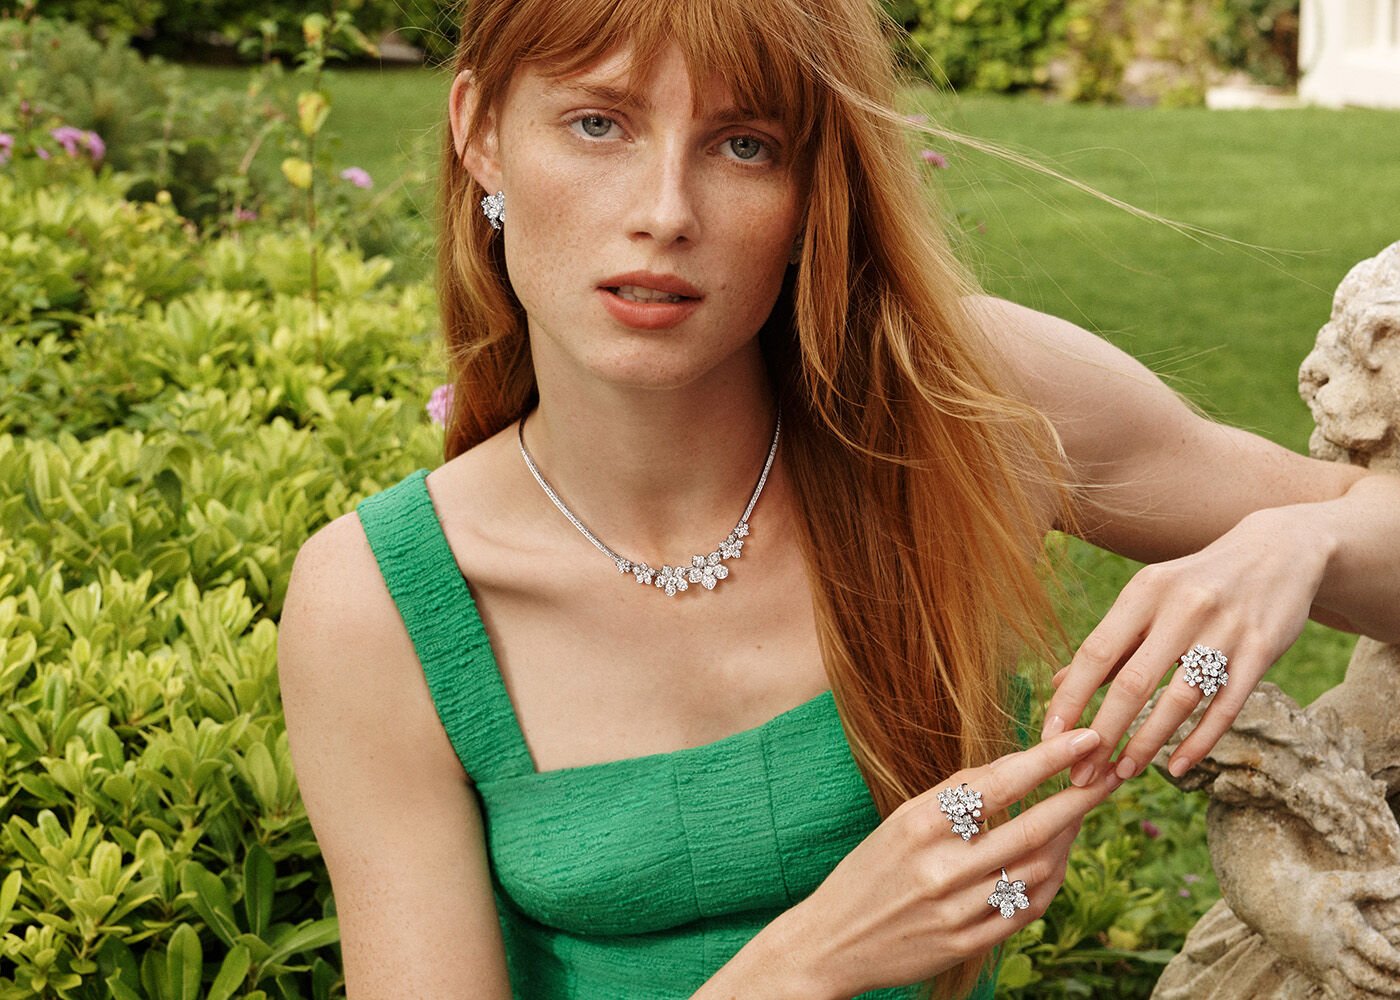 Model wearing jewellery from the Graff Wild Flower collection